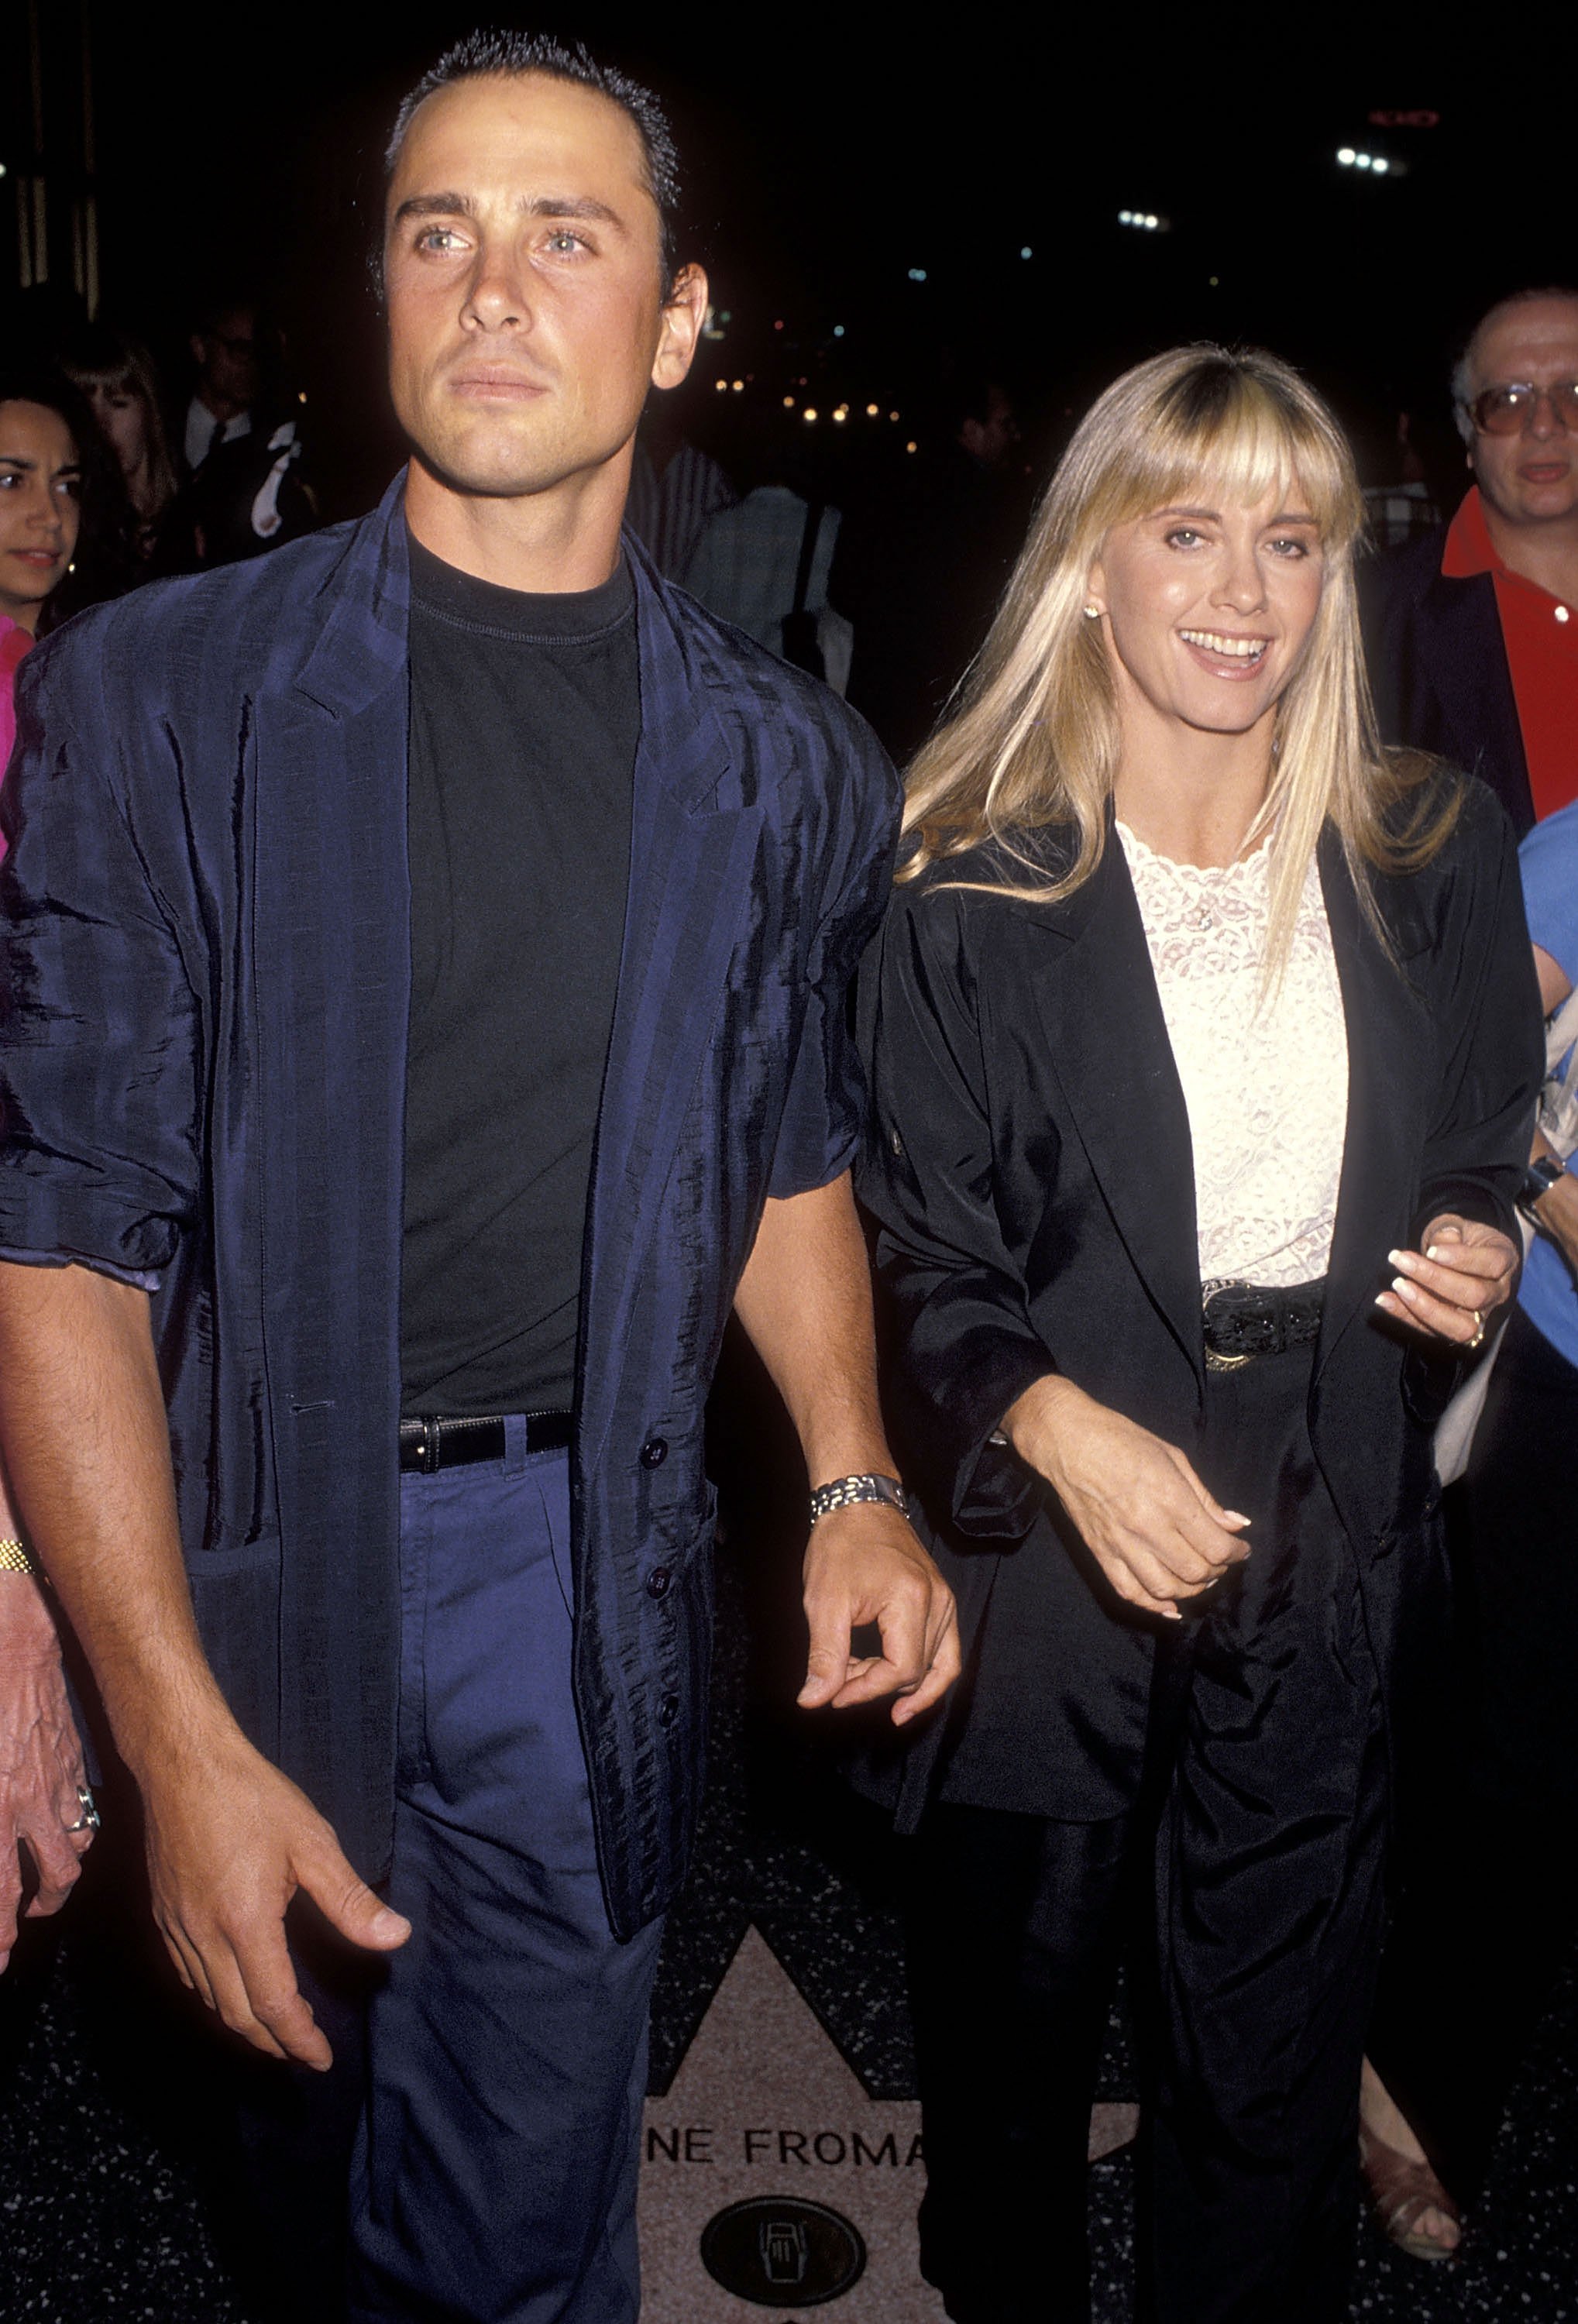 Singer Olivia Newton-John and husband Matt Lattanzi attend the "Out There Tonight" Opening Night Performance on August 29, 1990 at the Pantages Theatre in Hollywood, California. | Source: Getty Images